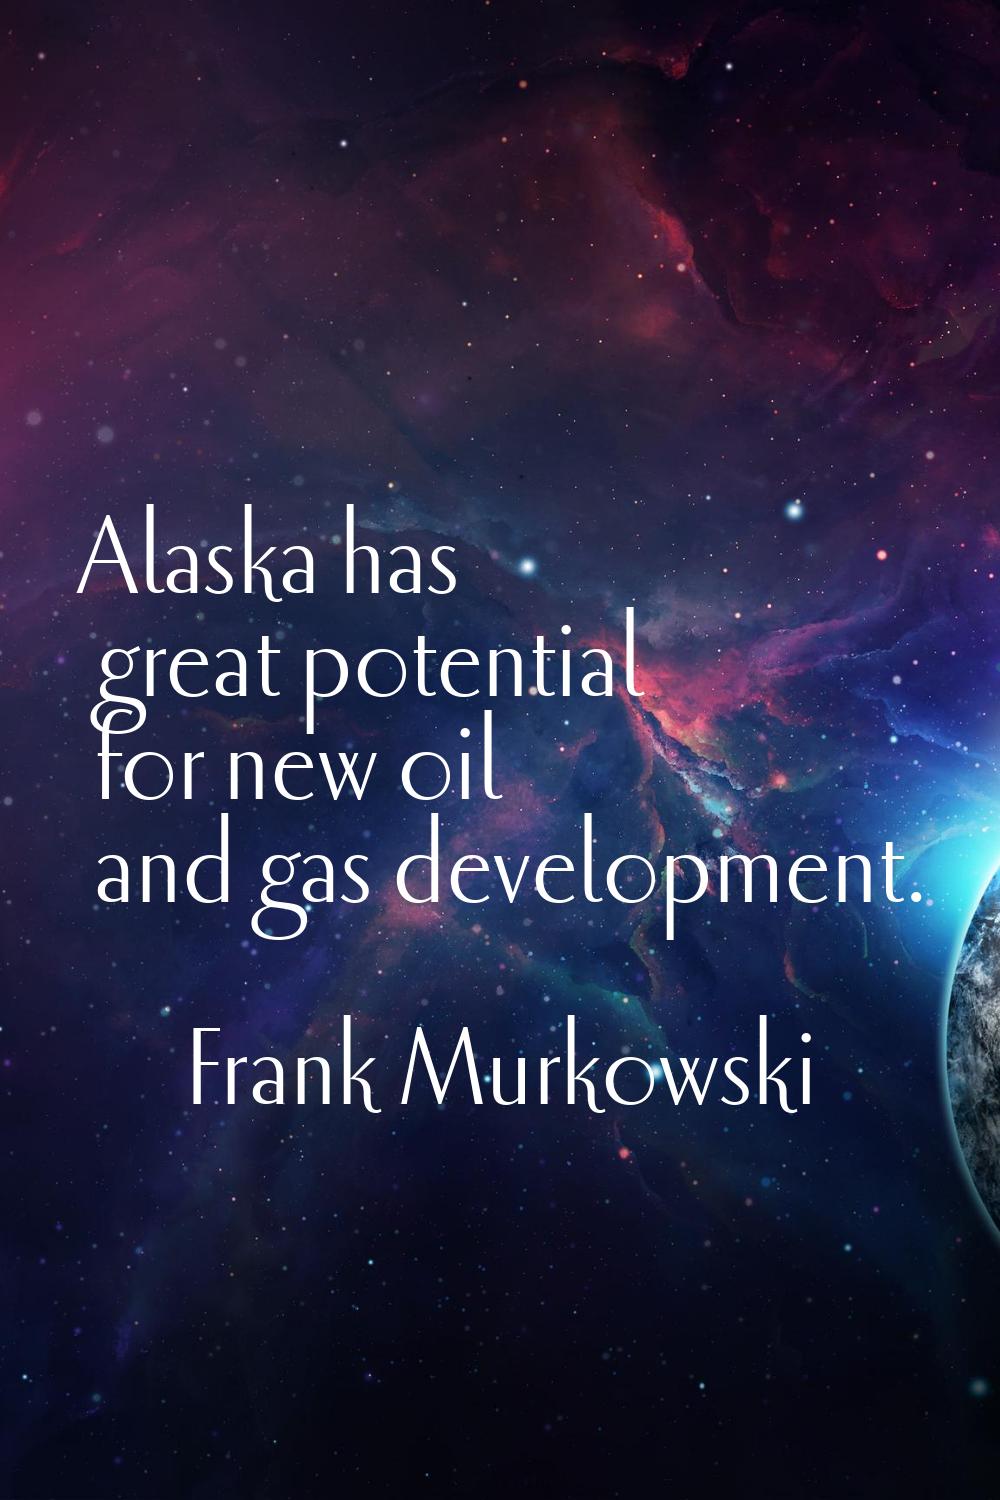 Alaska has great potential for new oil and gas development.